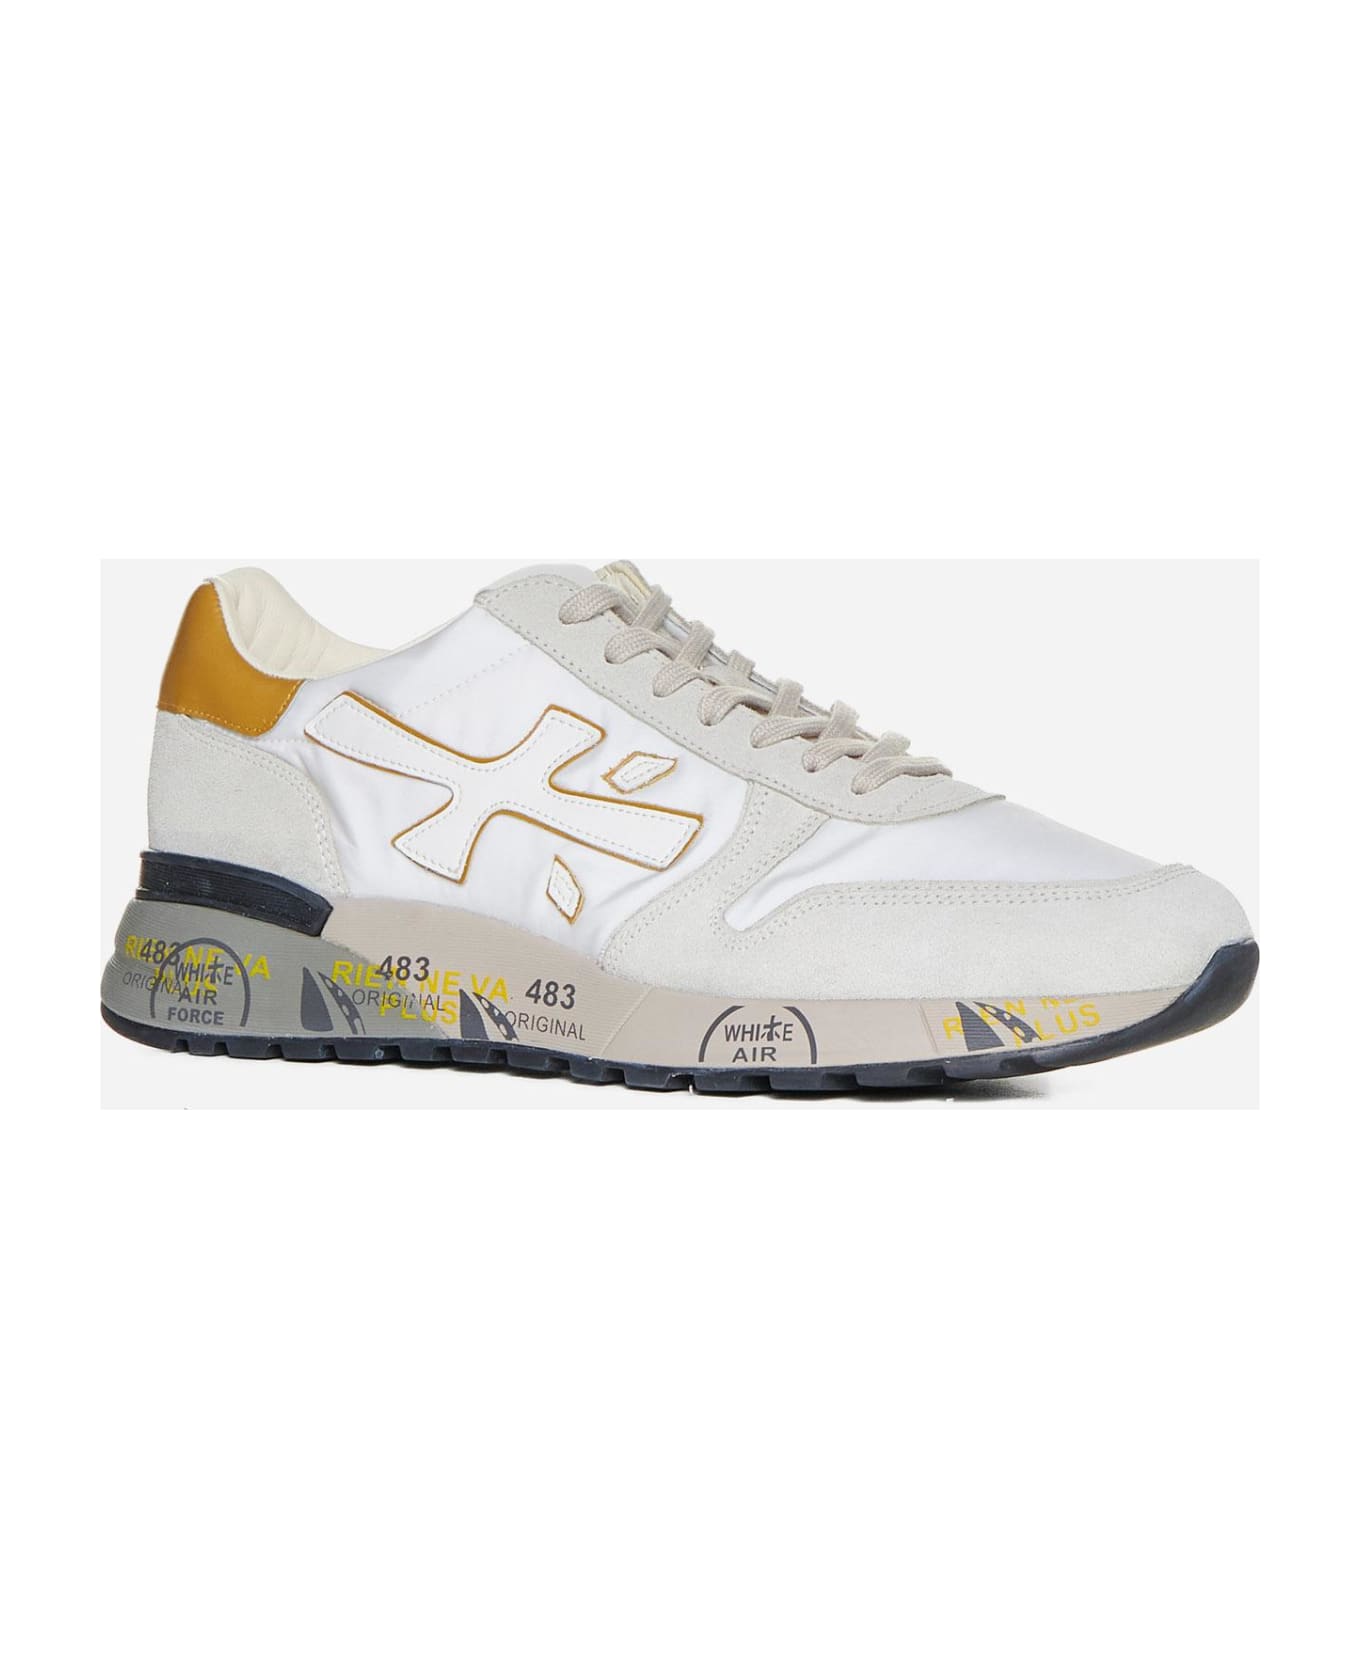 Premiata Mick Suede, Nylon And Leather Sneakers - Offwhite